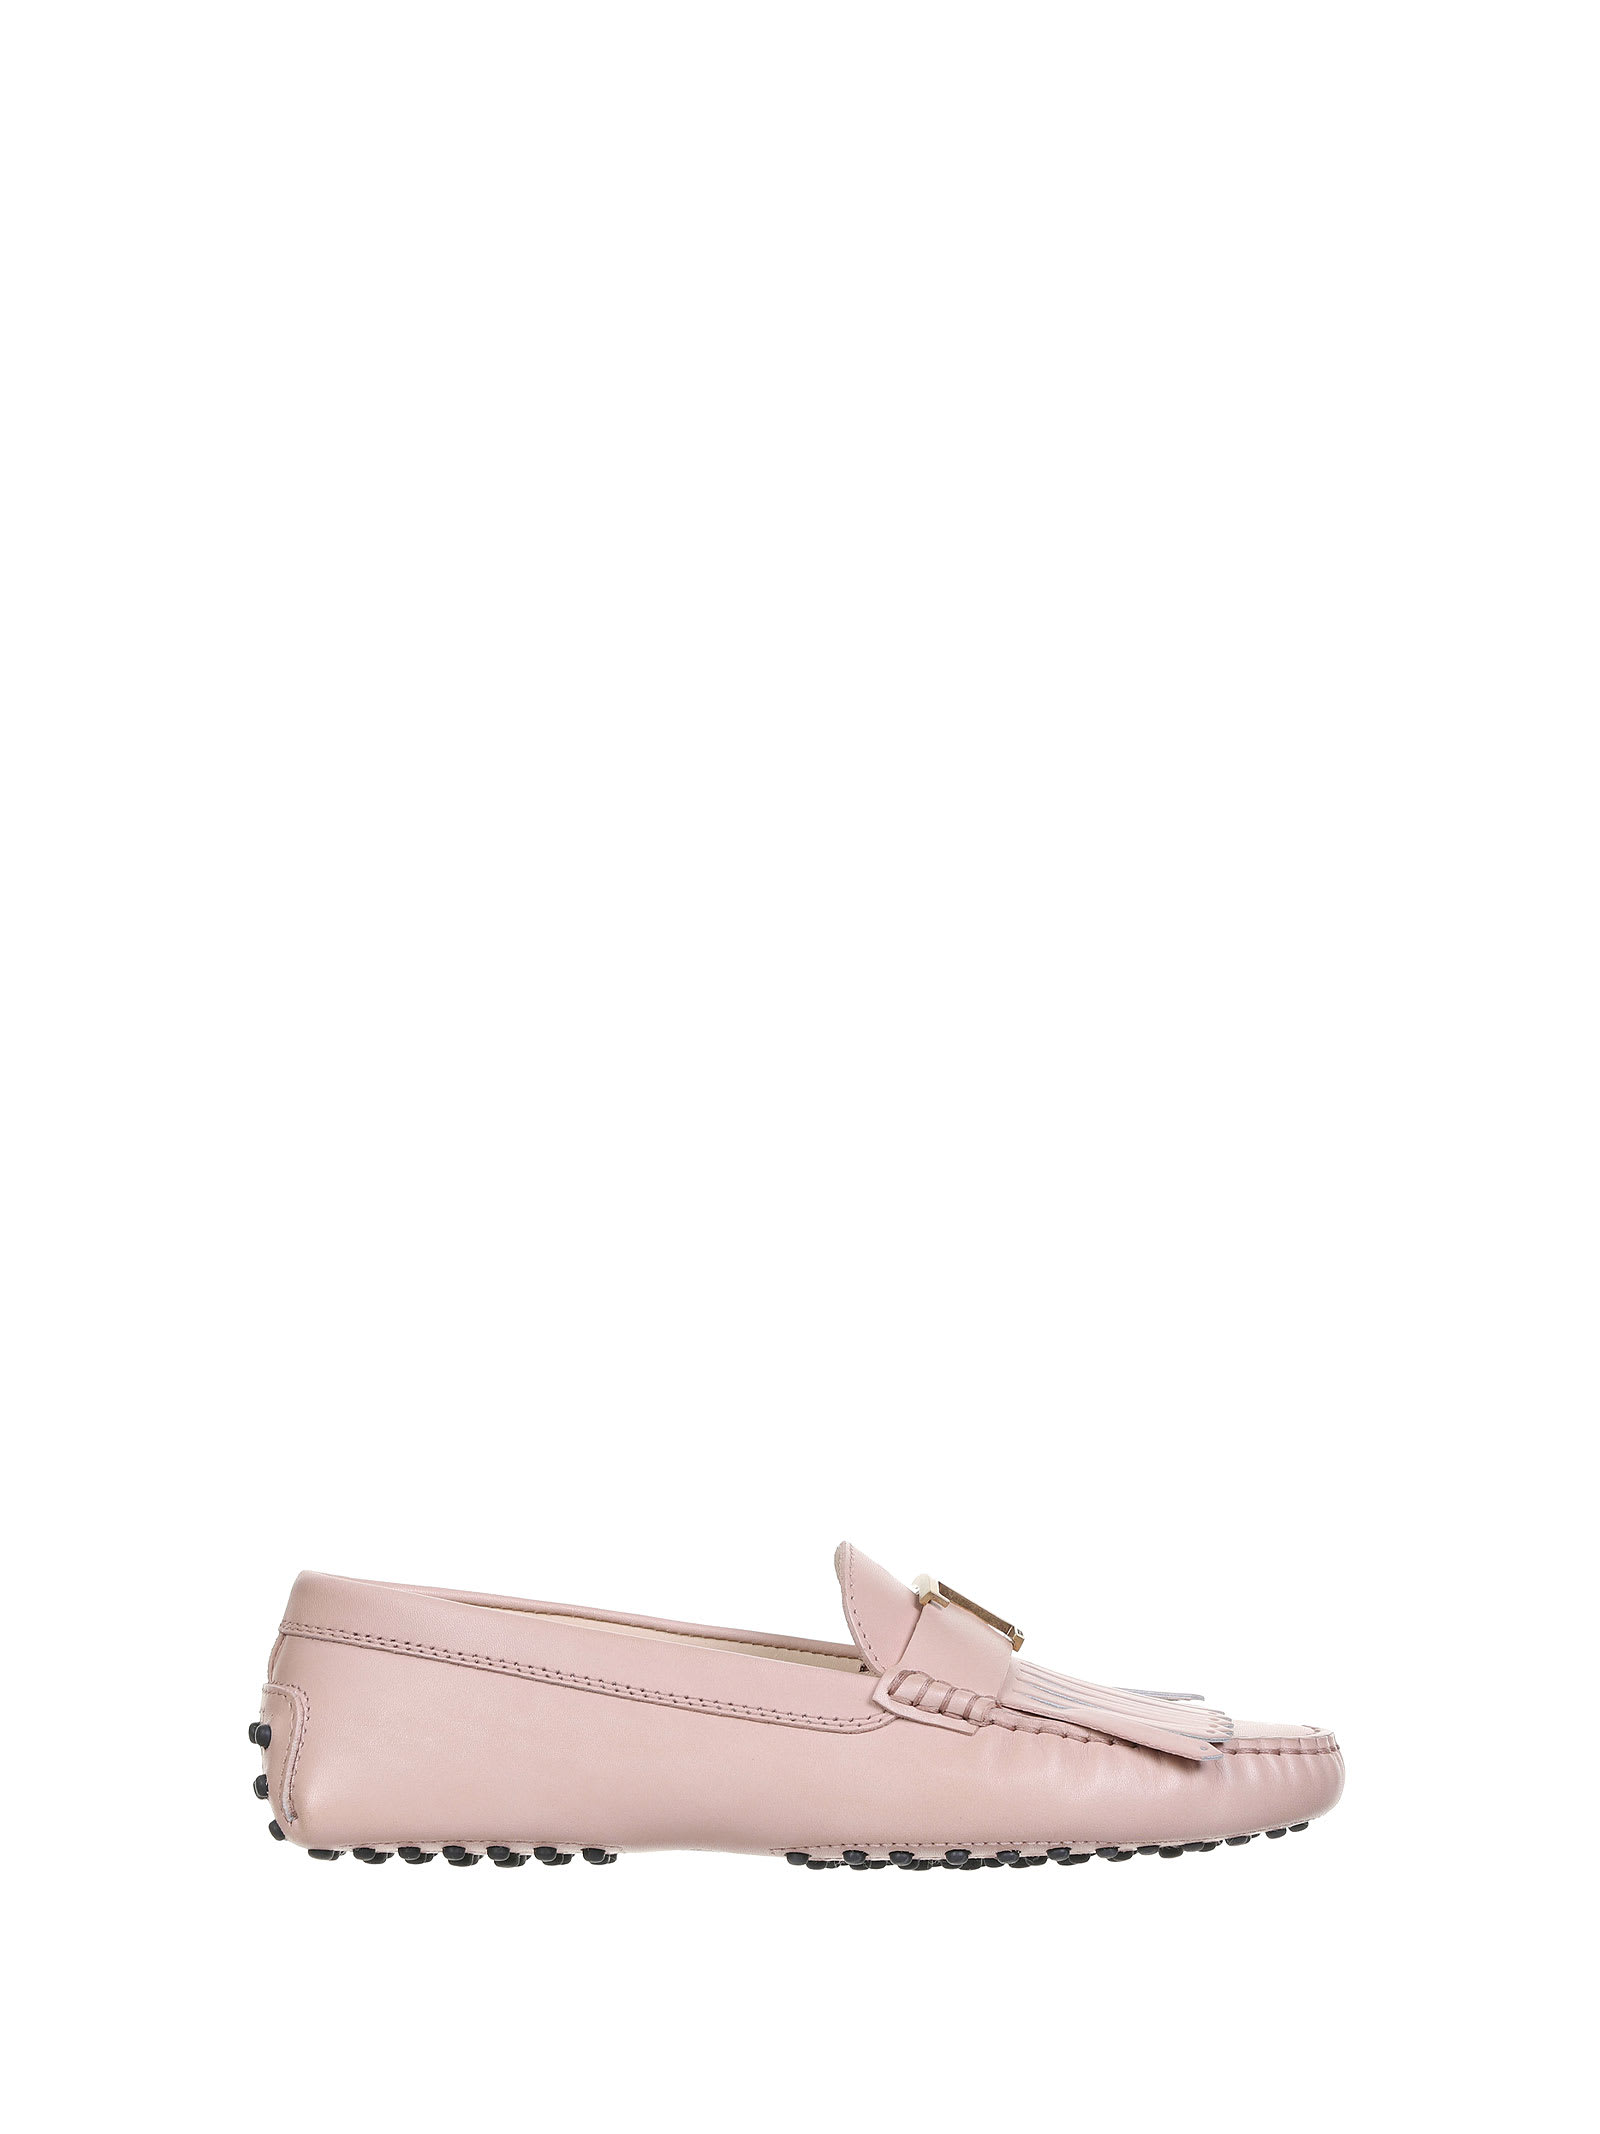 Tods Loafer In Powder Leather